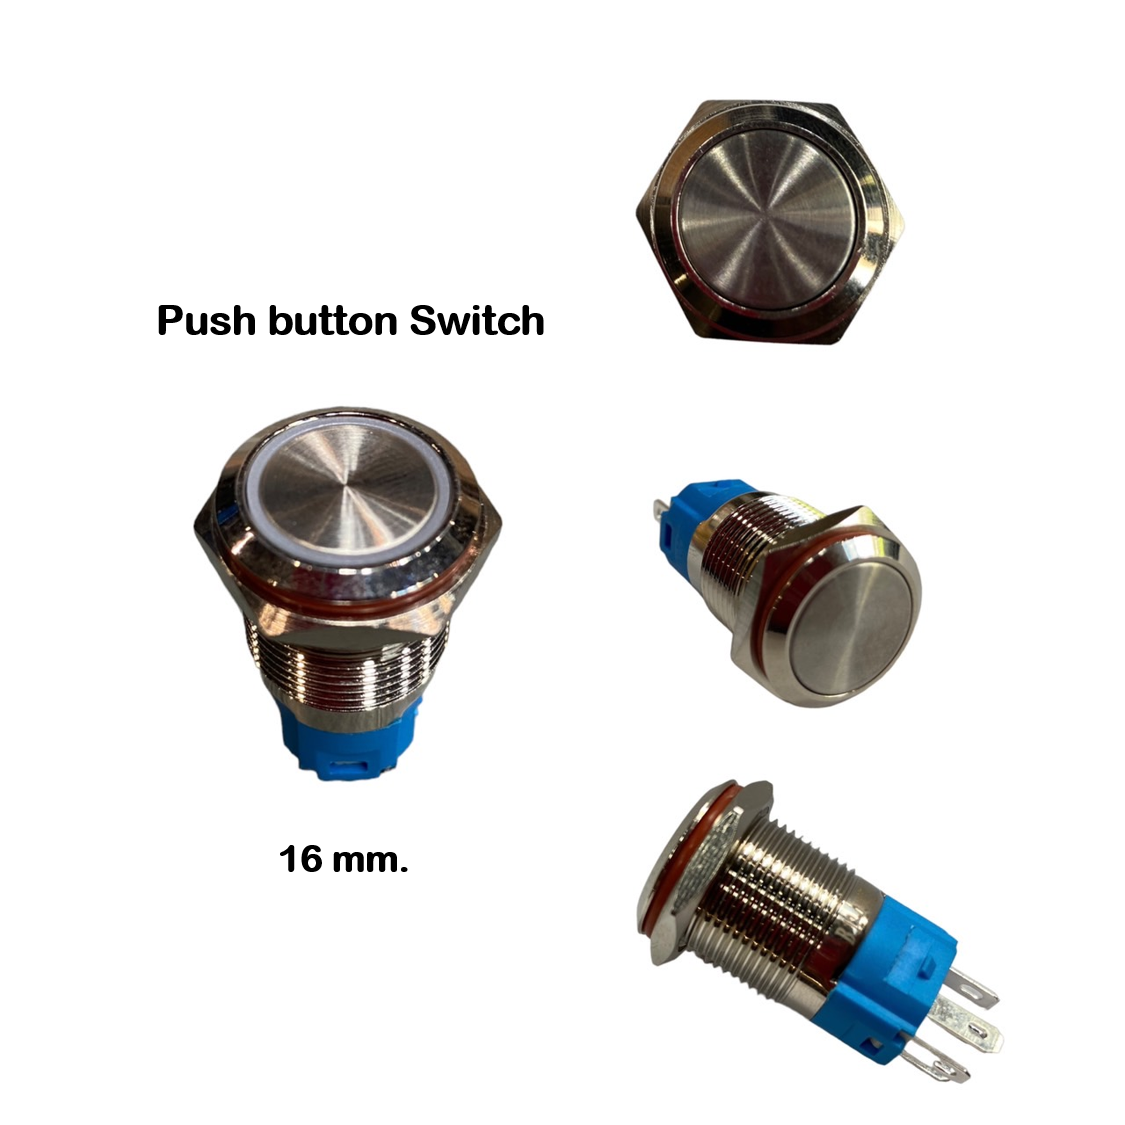 12-24V 16mm. metal Switch (Push button Switch)